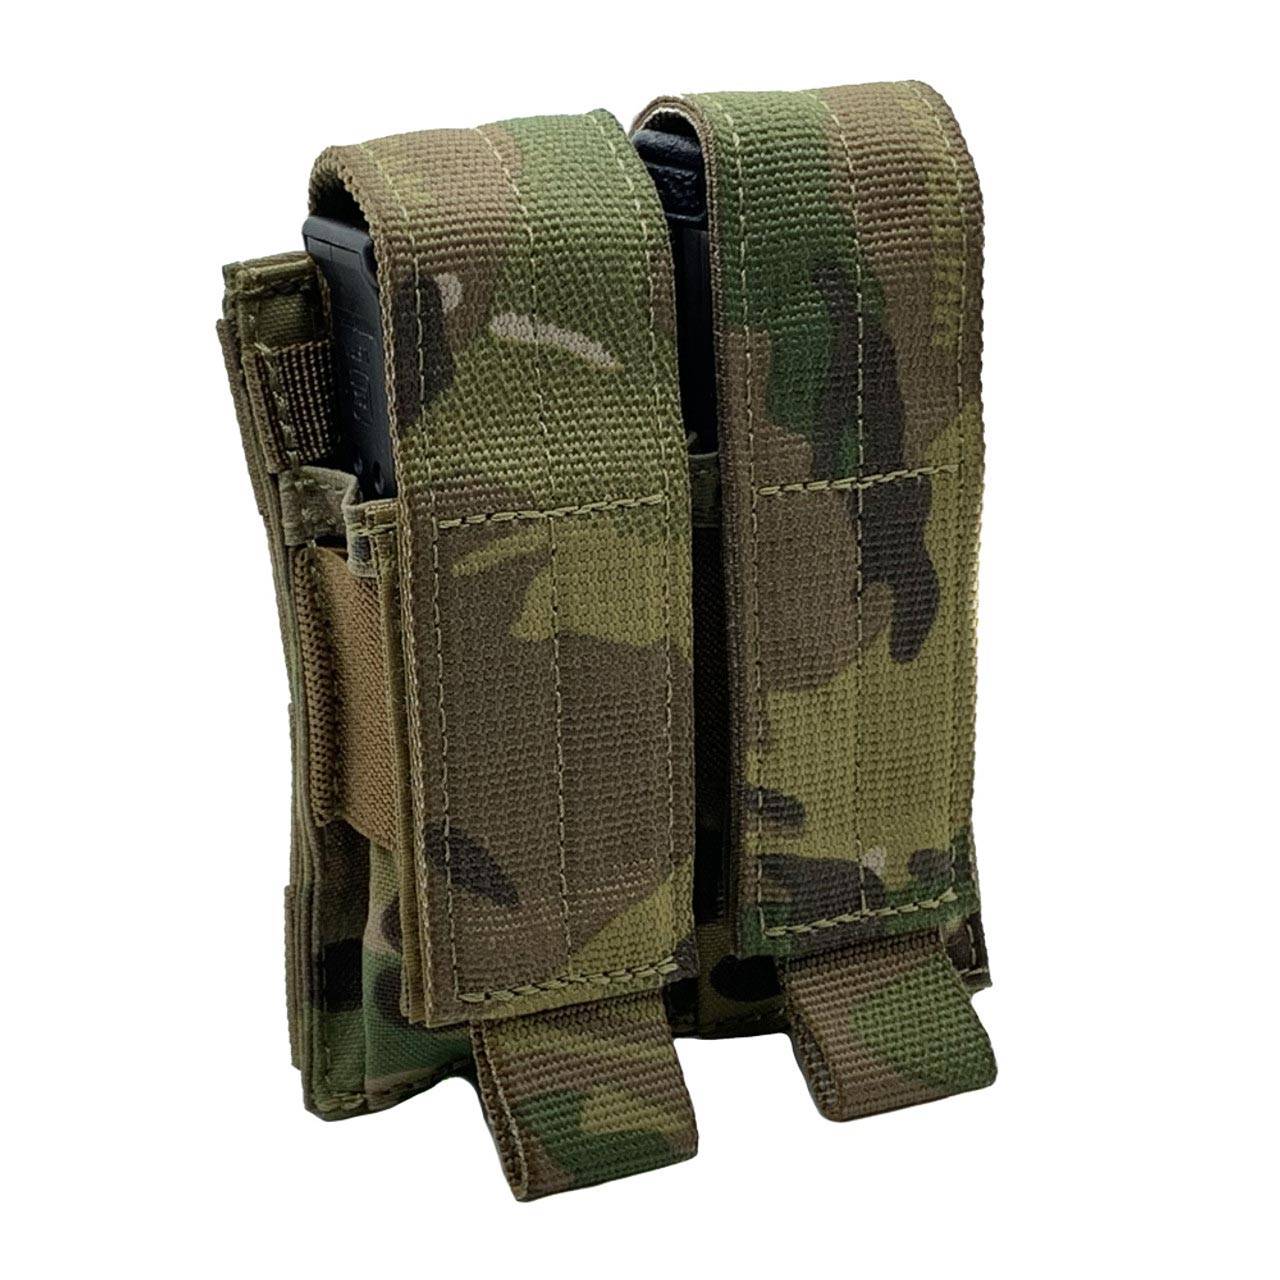 SHELLBACK TACTICAL THE DOUBLE PISTOL MAG POUCH